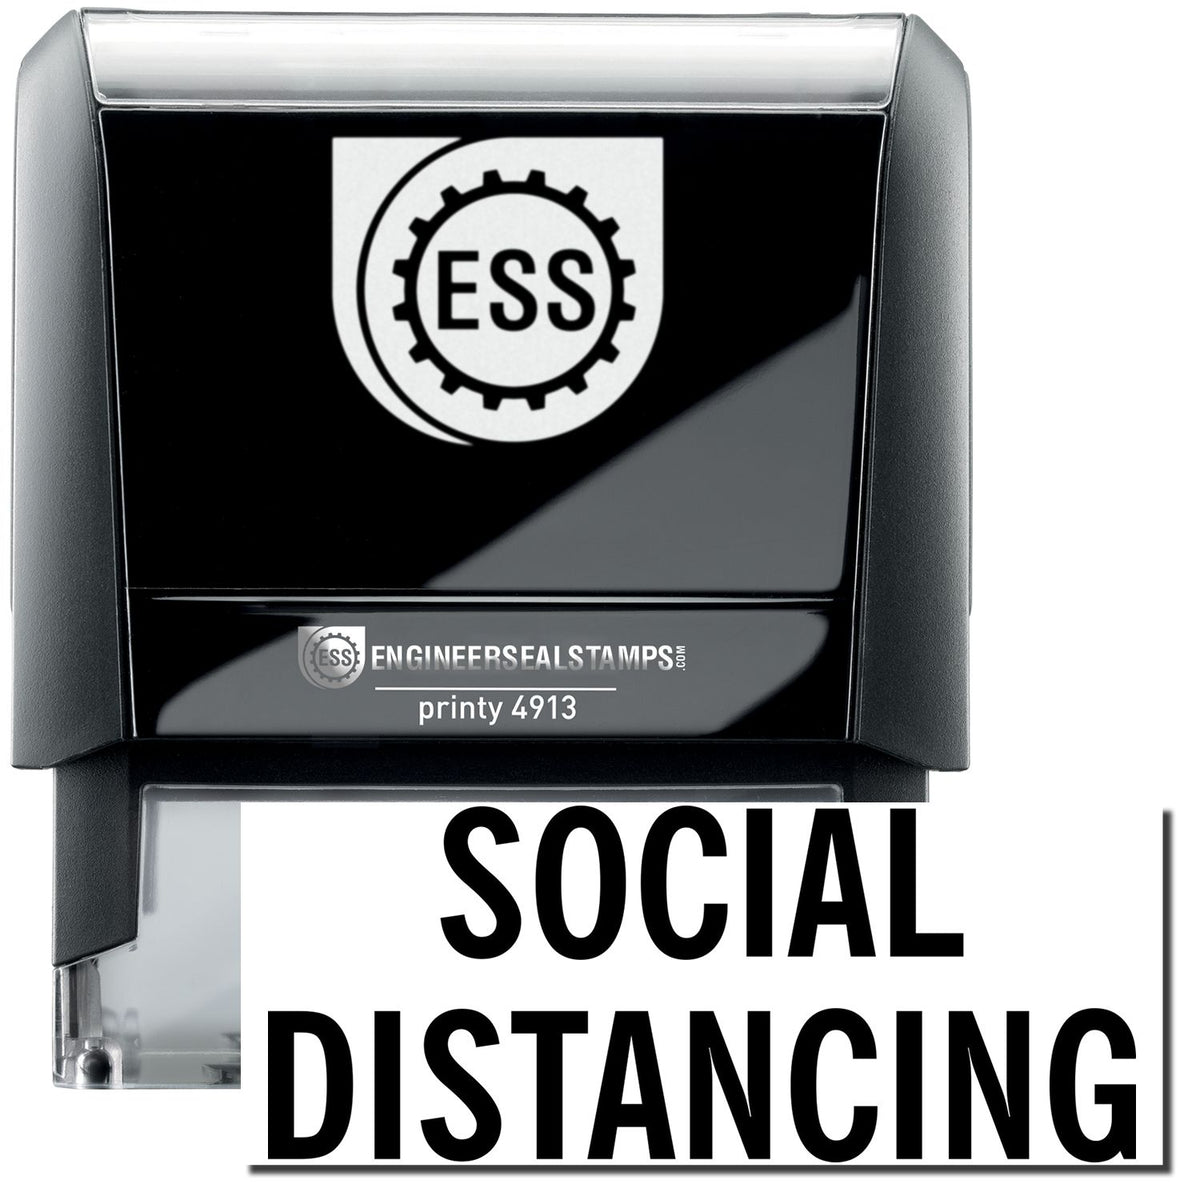 A self-inking stamp with a stamped image showing how the text &quot;SOCIAL DISTANCING&quot; in a large font is displayed by it after stamping.